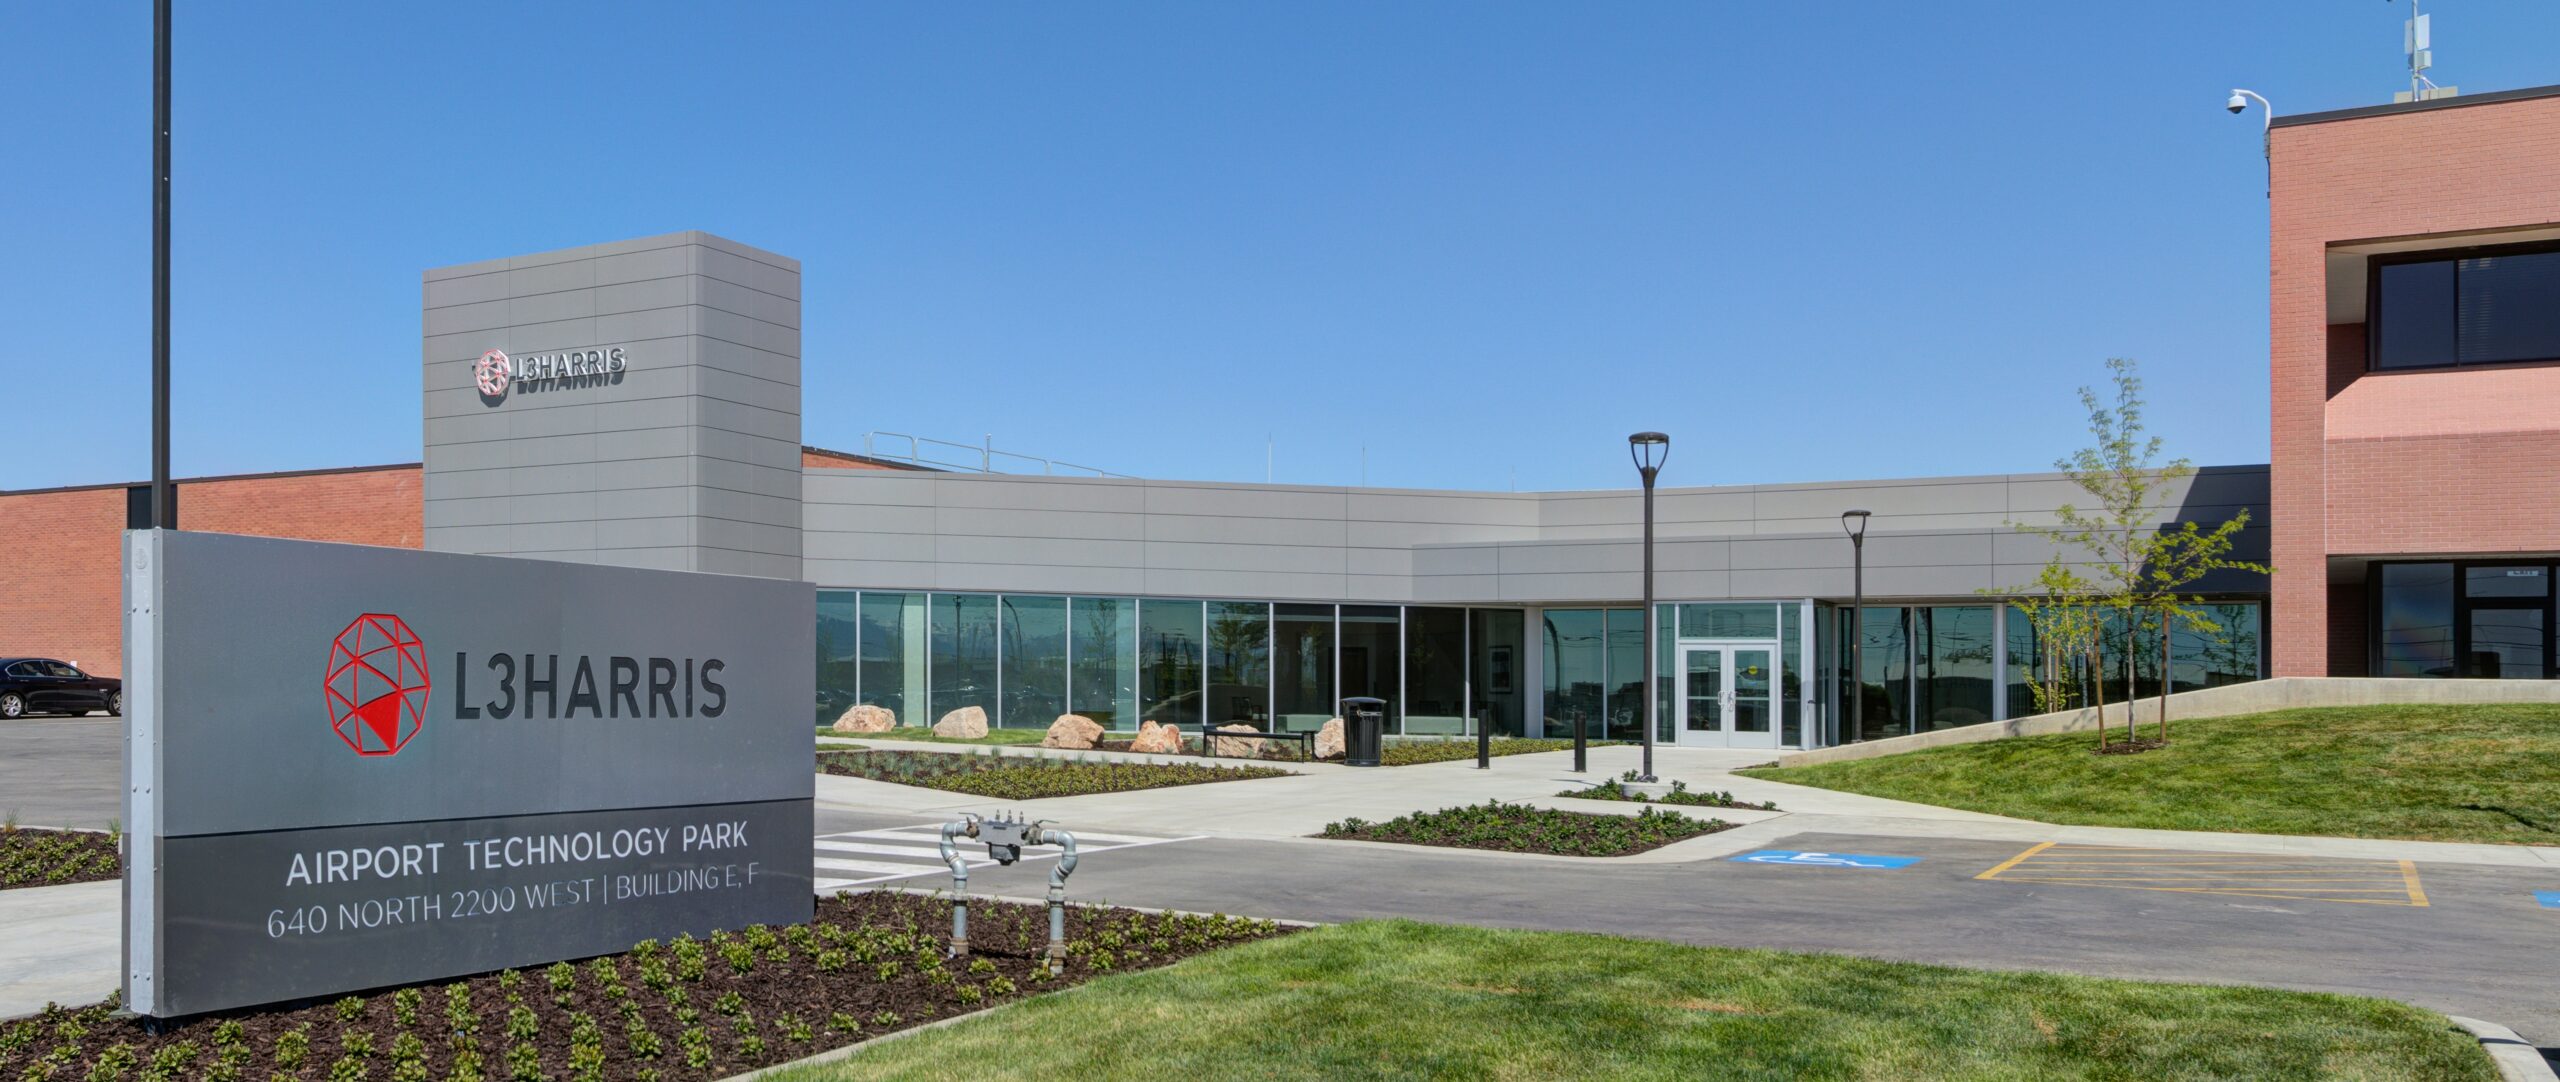 Drawbridge Realty’s Airport Technology Park in Salt Lake City Extends Leases with L3Harris